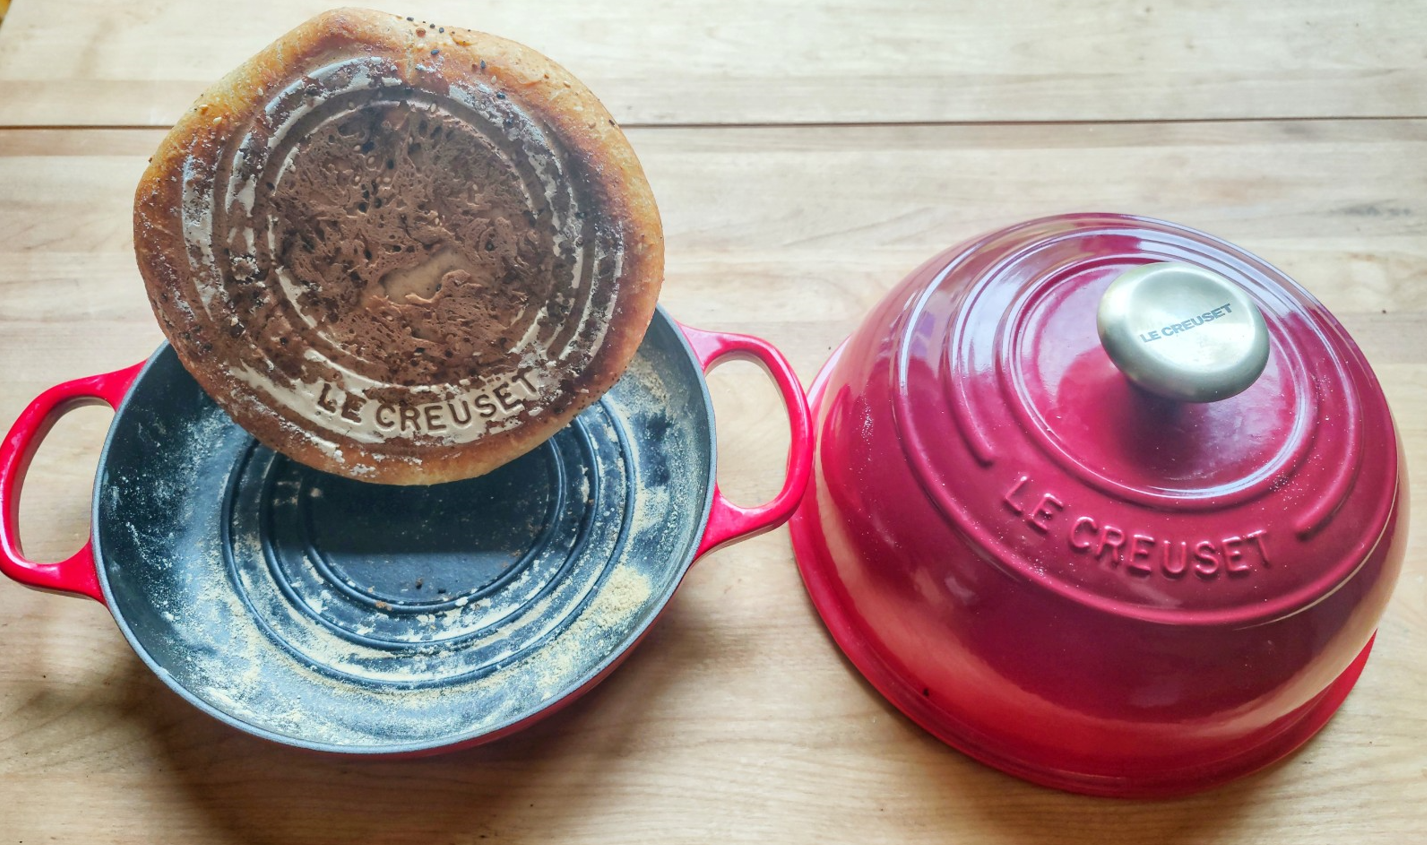 Get Baking with the Le Creuset Bread Oven - Chefs Corner Store